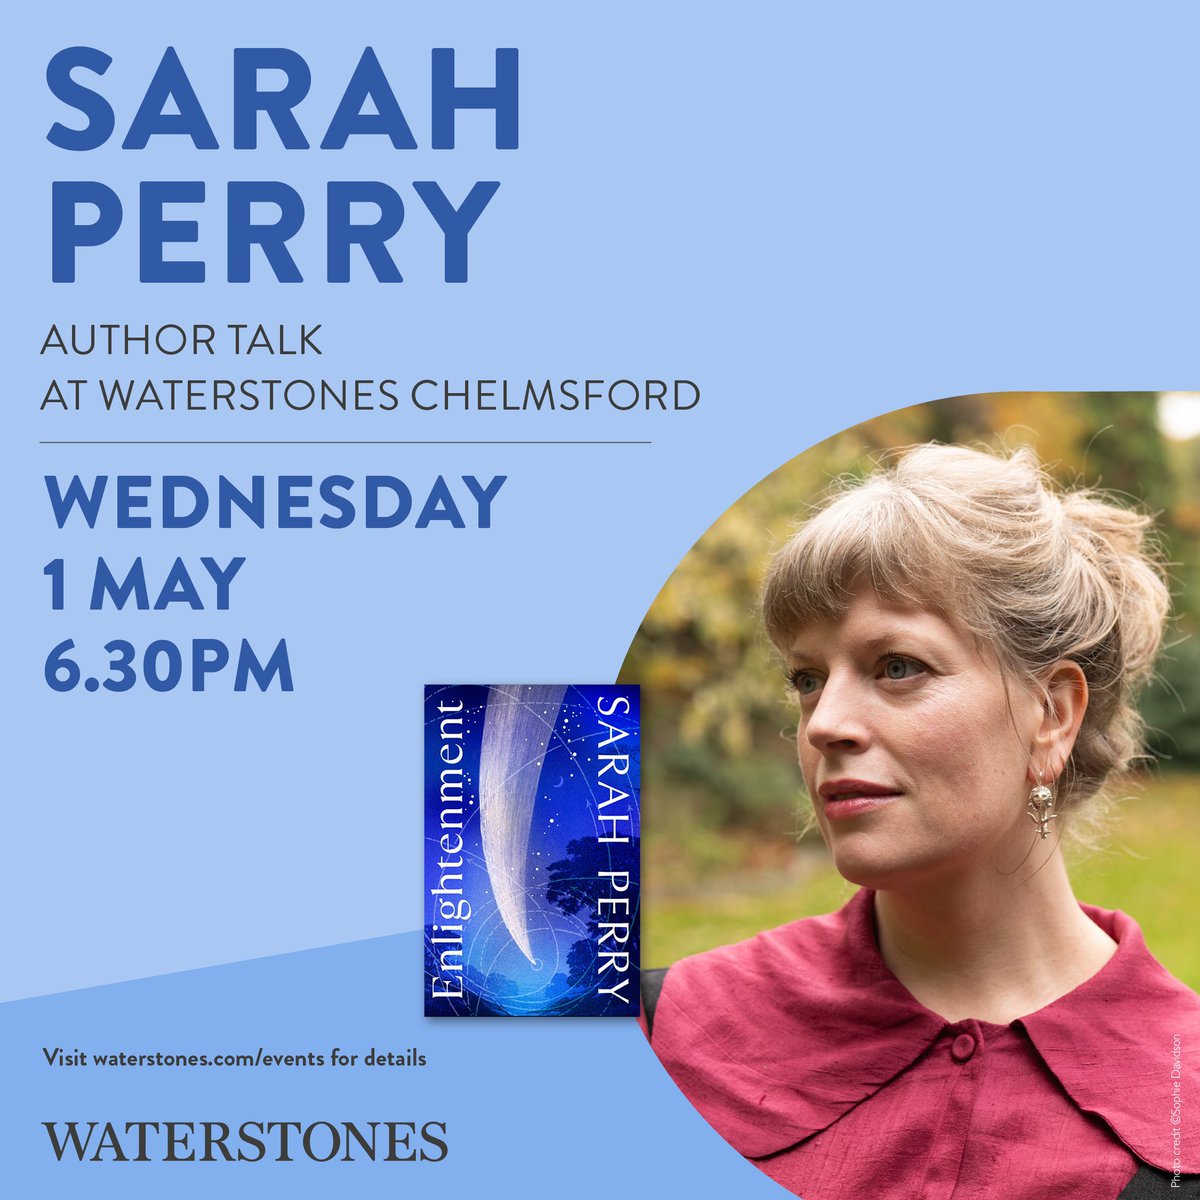 We’re looking forward to welcoming Sarah Perry in May. We know you’re going to ❤️ her new book Enlightenment. With over half the tickets already gone don’t miss out. #enlightenment #chelmsford #books #bookstagram #essex eventbrite.co.uk/e/sarah-perry-…